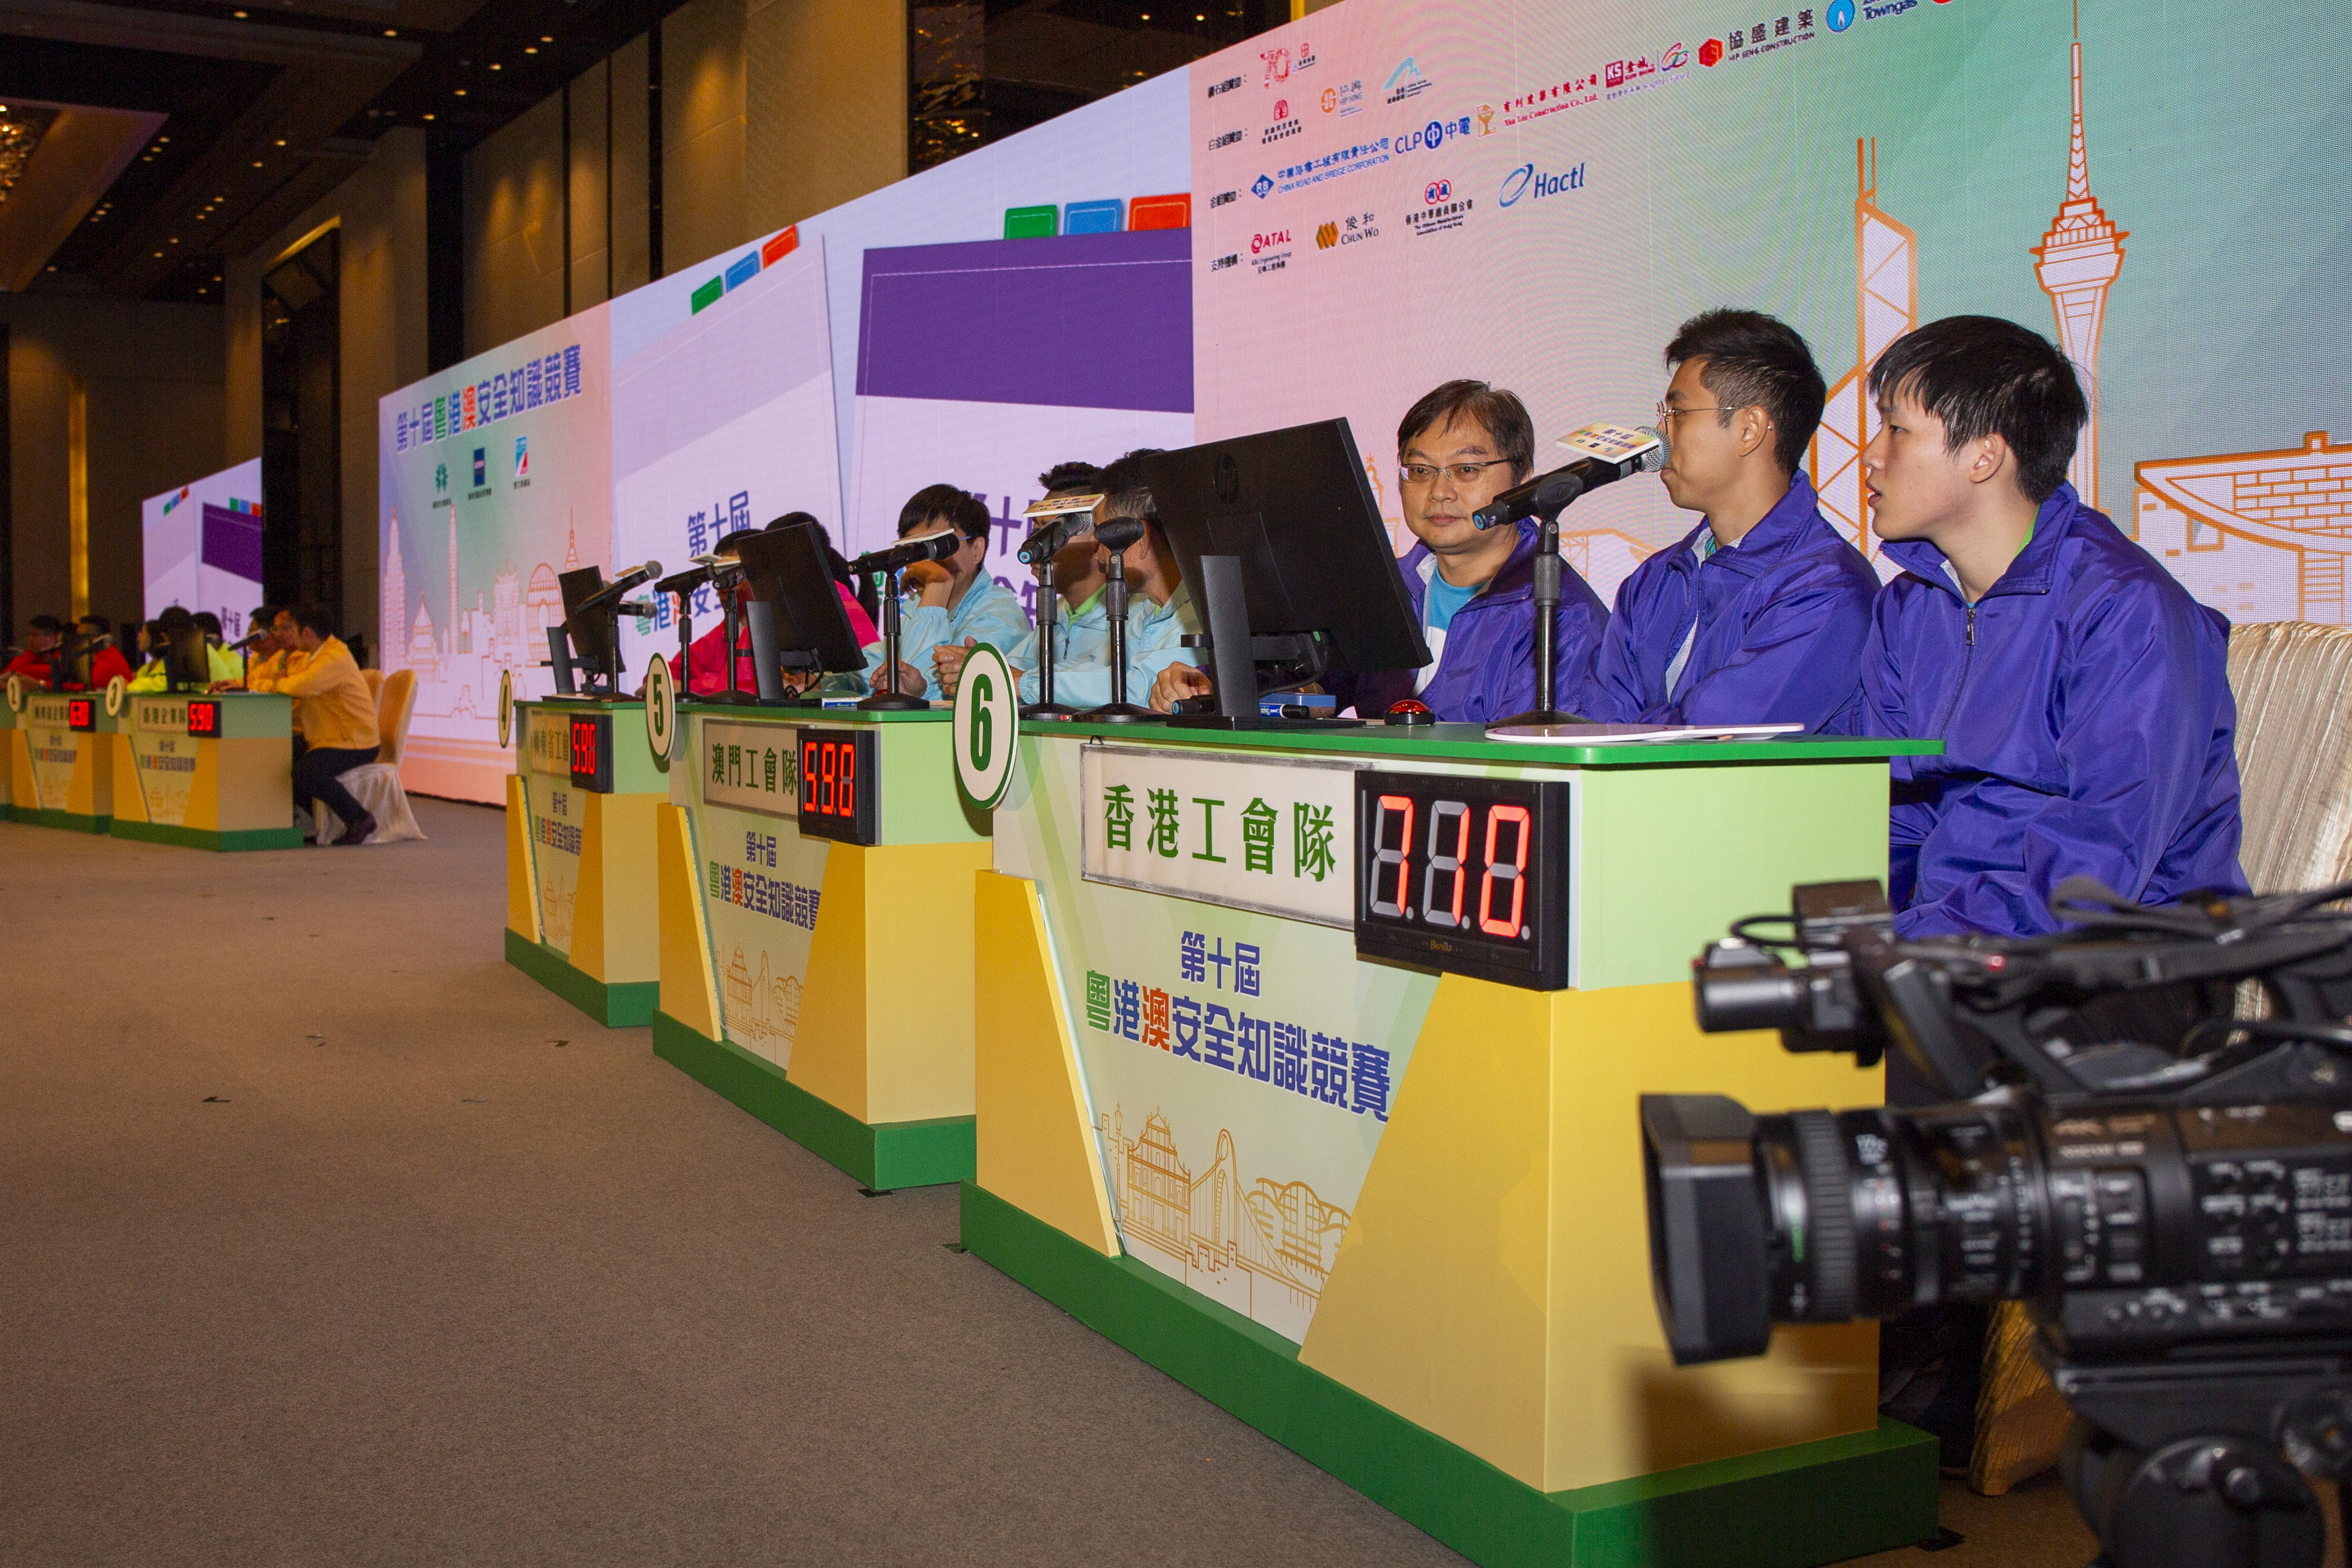 Photo 6: DSD’s “E&M Safety Team” was competing with teams from Guangdong Province and Macao SAR.